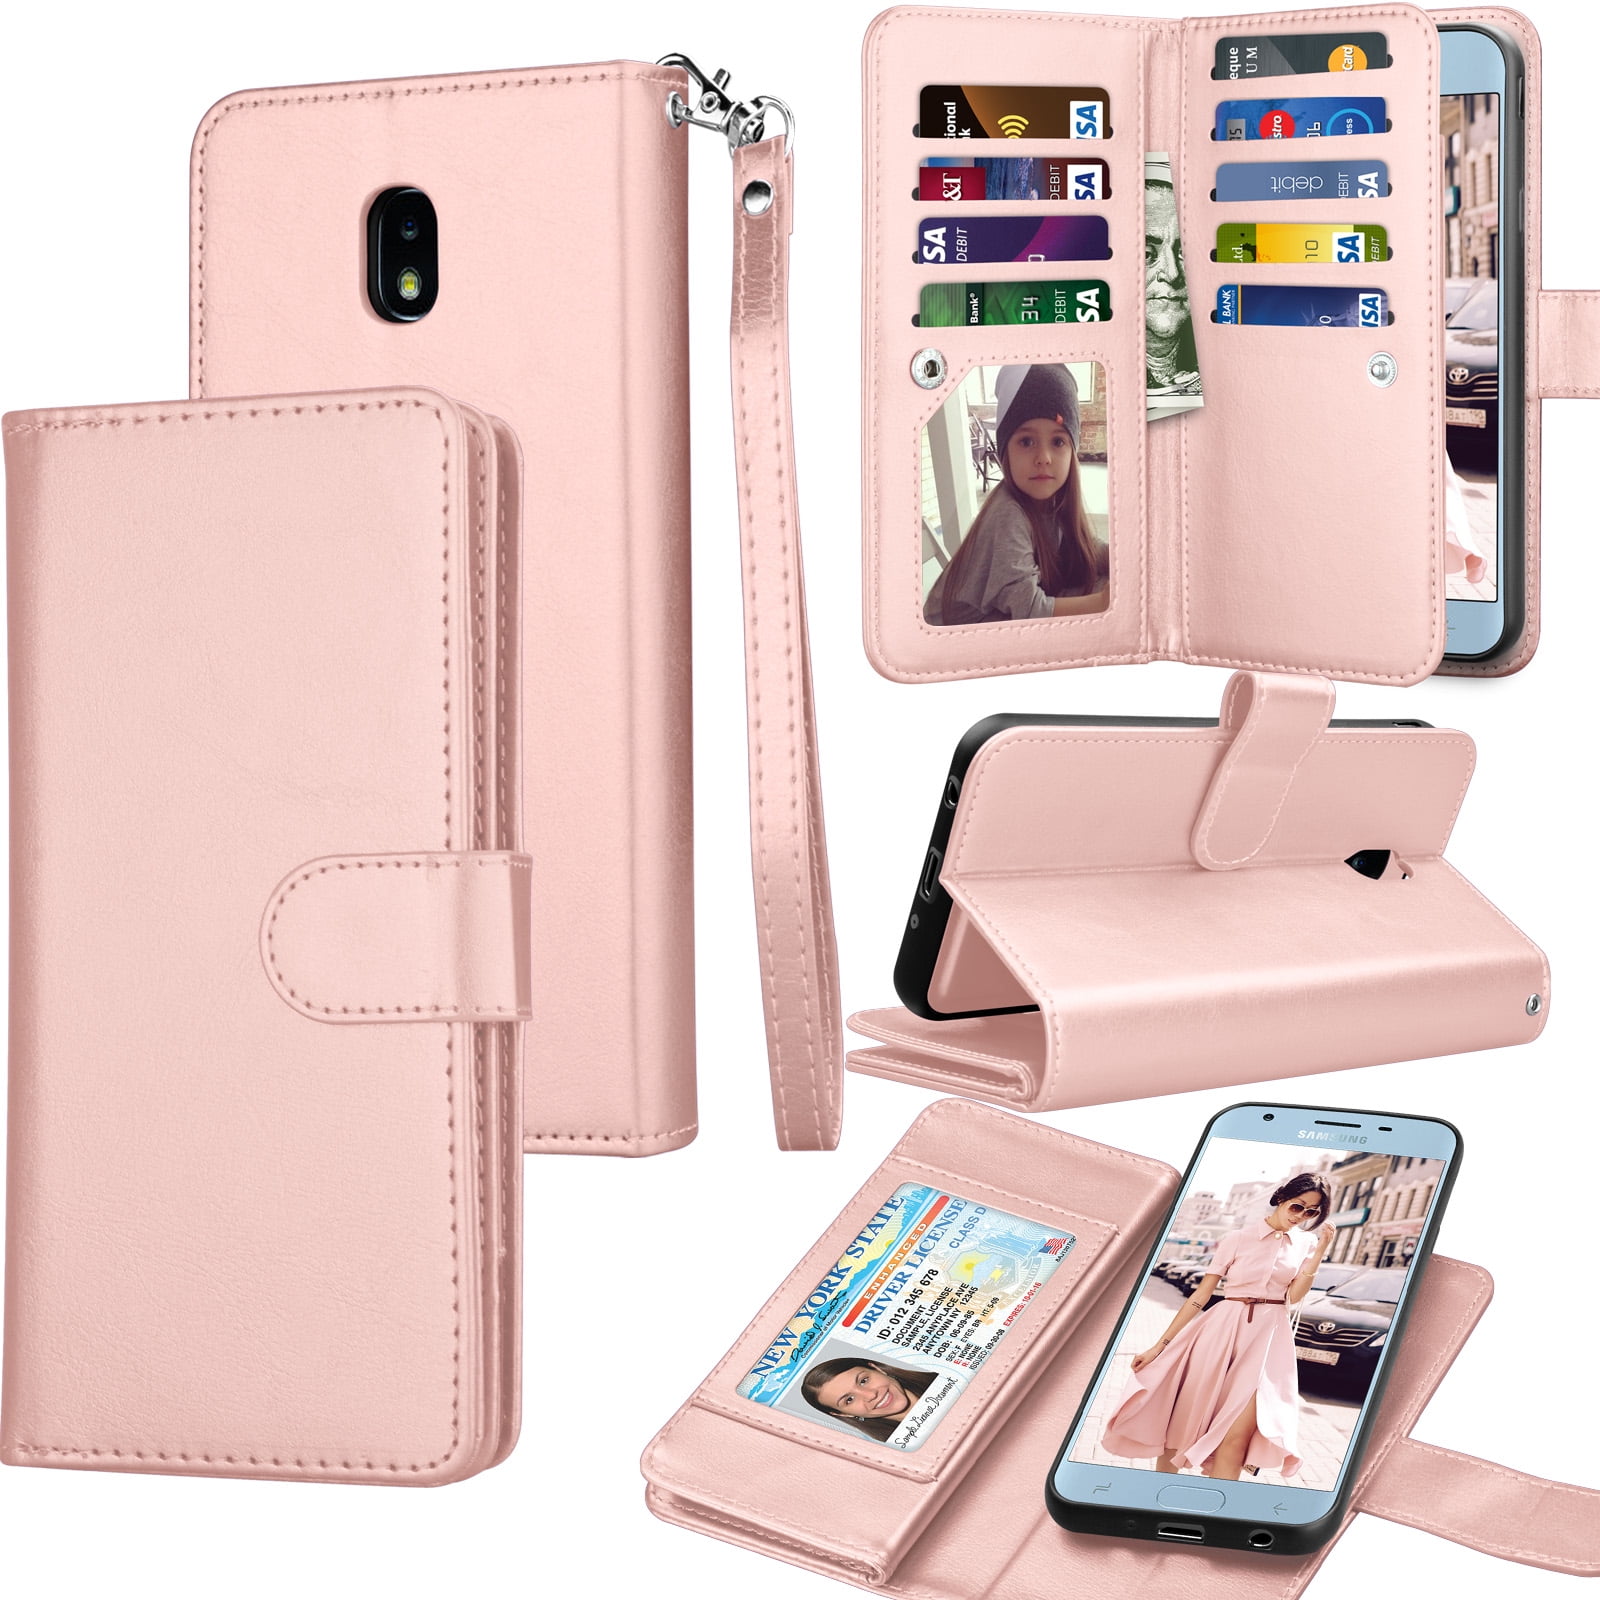 XYX Love Heart PU Leather Wallet Case for Samsung Galaxy J3 V J3 2016